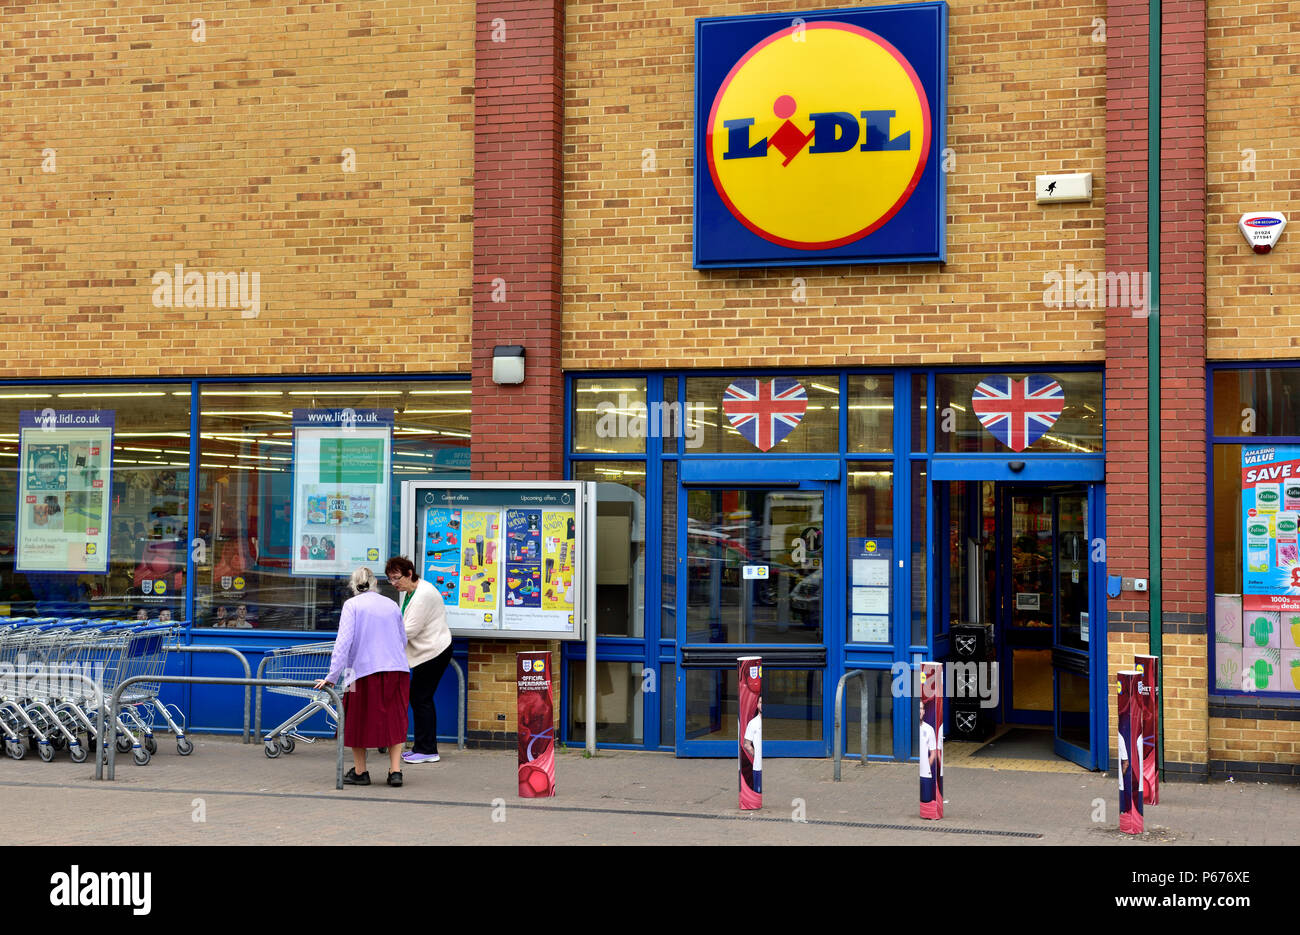 Outside LIDL store Stock Photo